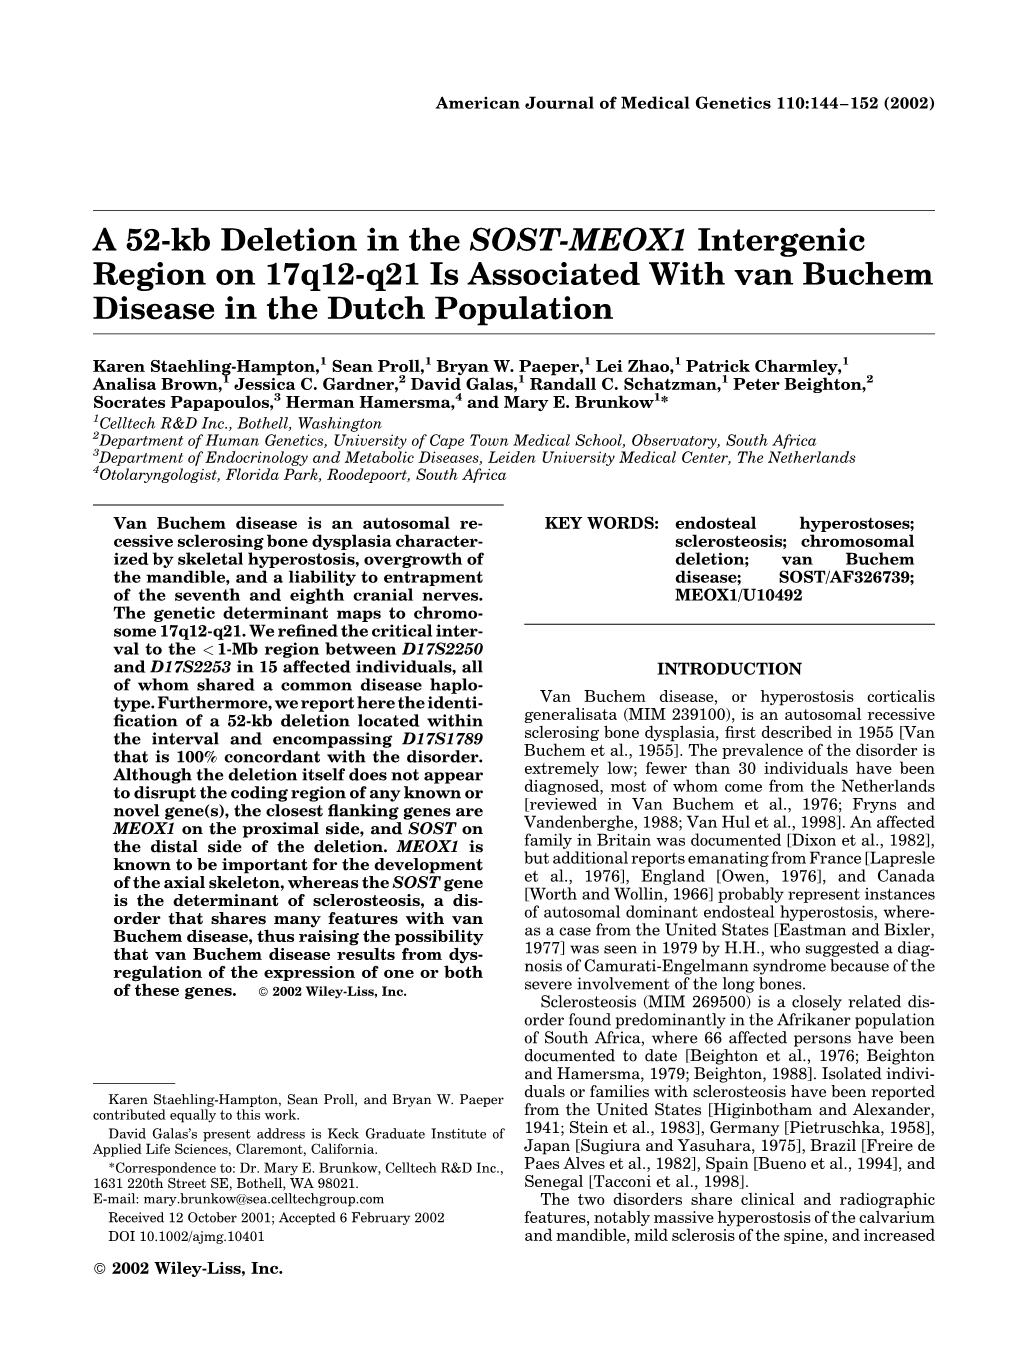 A 52-Kb Deletion in the SOST-MEOX1 Intergenic Region on 17Q12-Q21 Is Associated with Van Buchem Disease in the Dutch Population